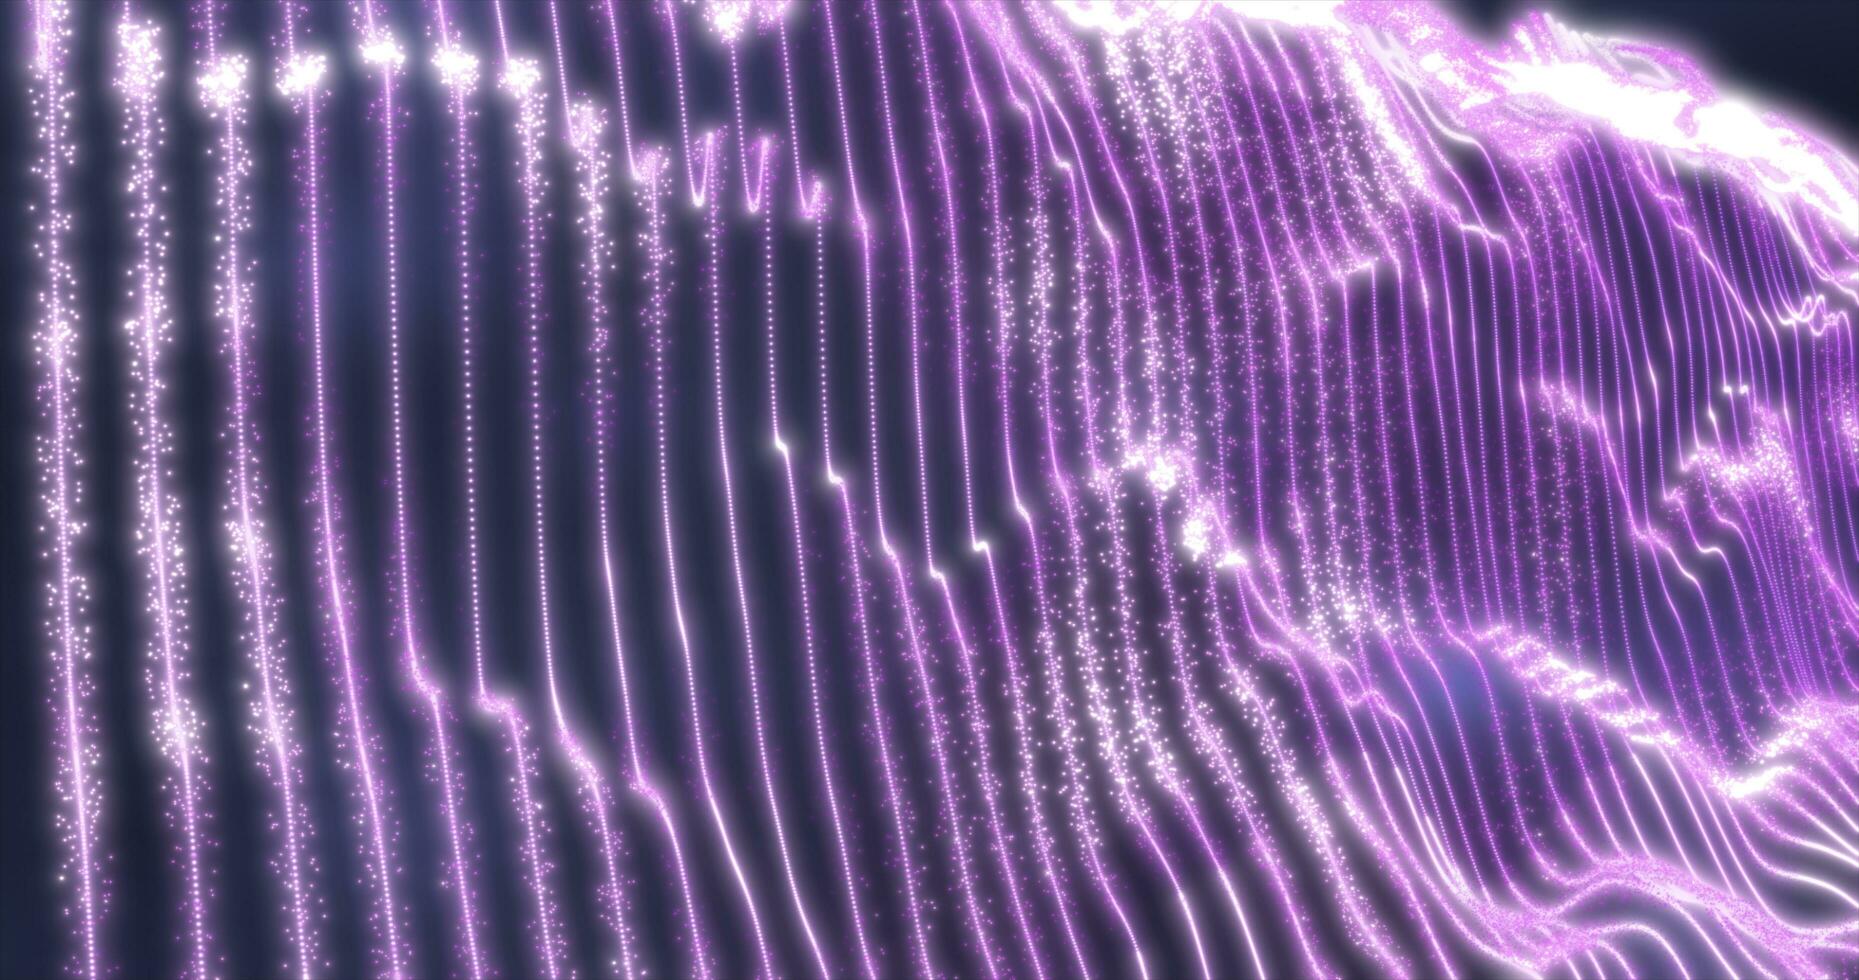 Purple energy waves from particles glowing bright magical abstract background photo